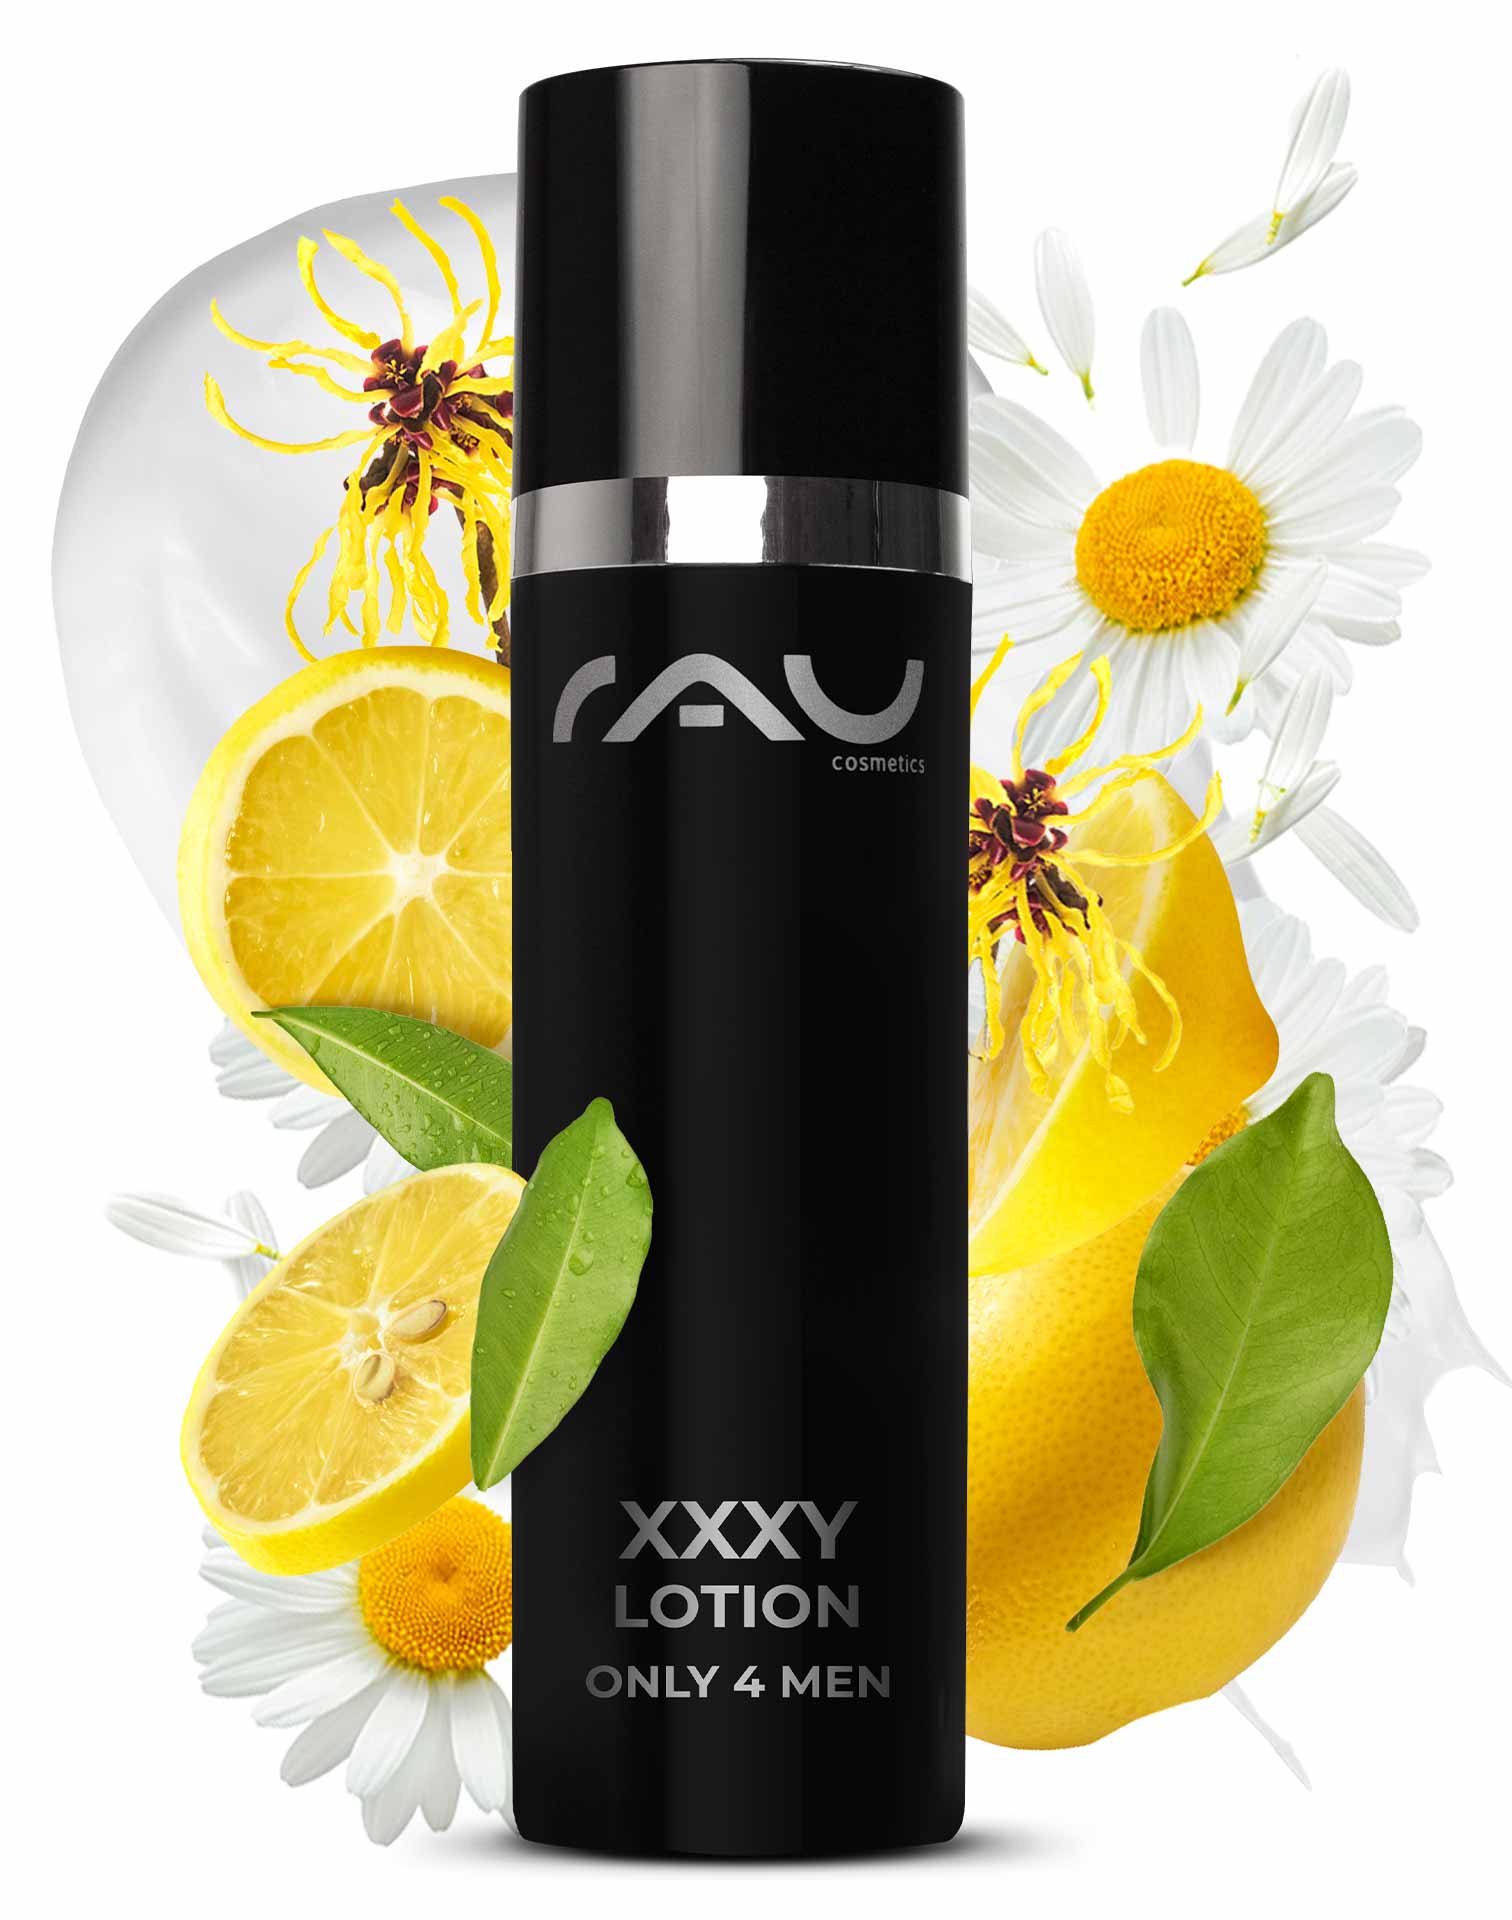 XXXY Lotion only 4 men 50 ml - Anti-Aging Tagespflege